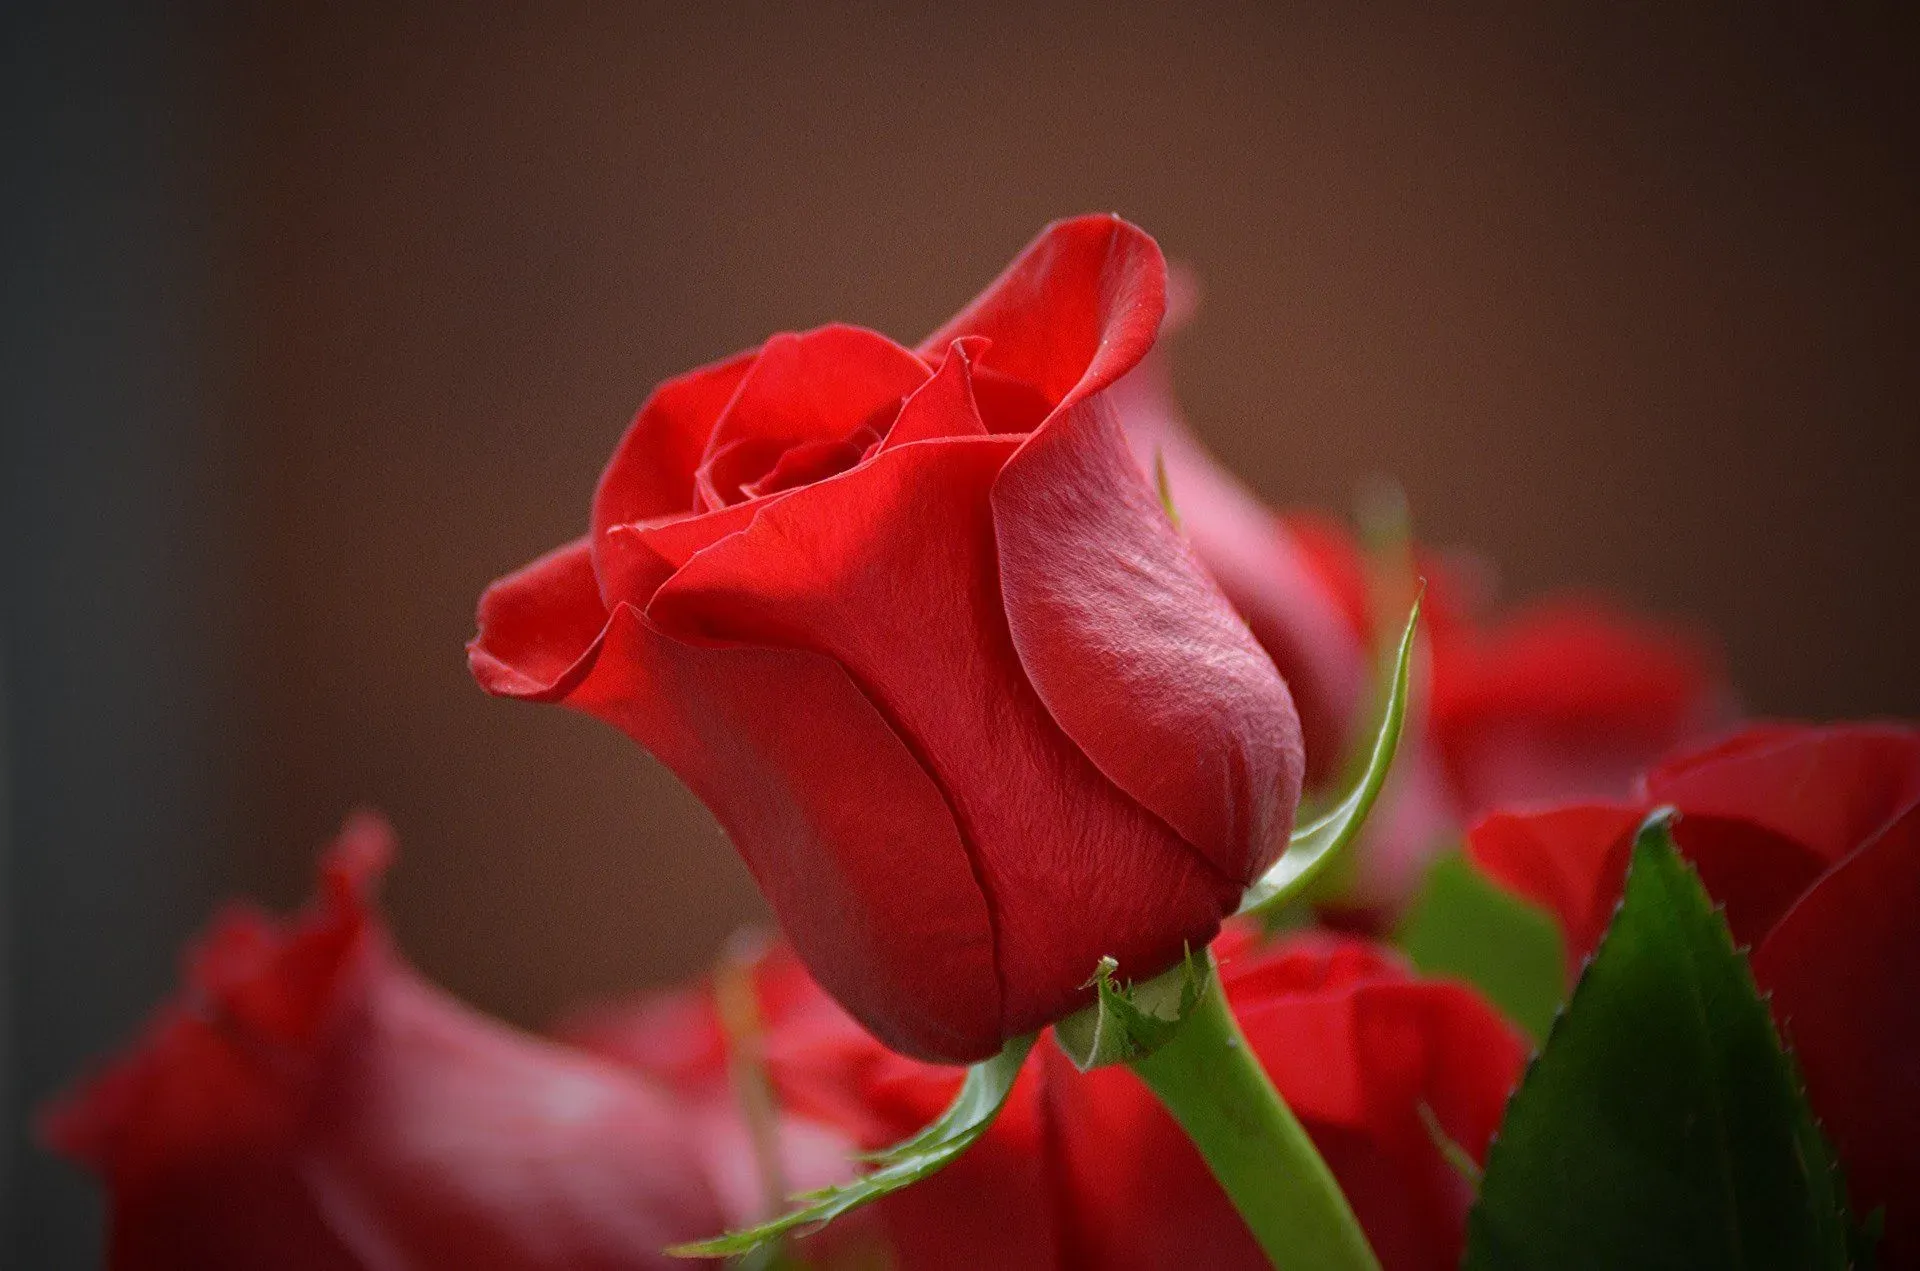 Roses came into existence during the medieval period and have been cultivated ever since as most people adore them.